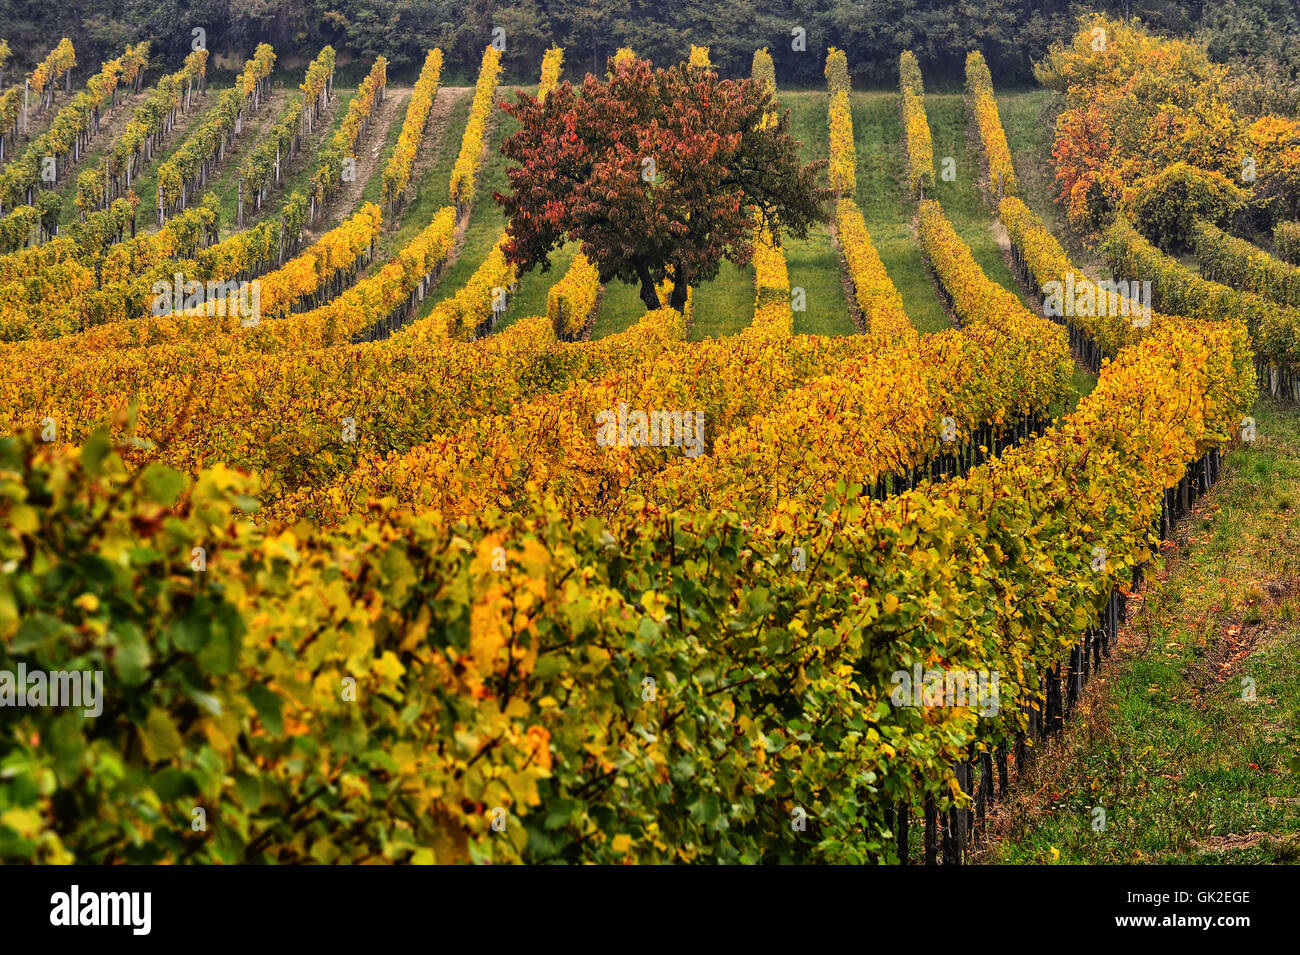 agriculture farming vineyard Stock Photo